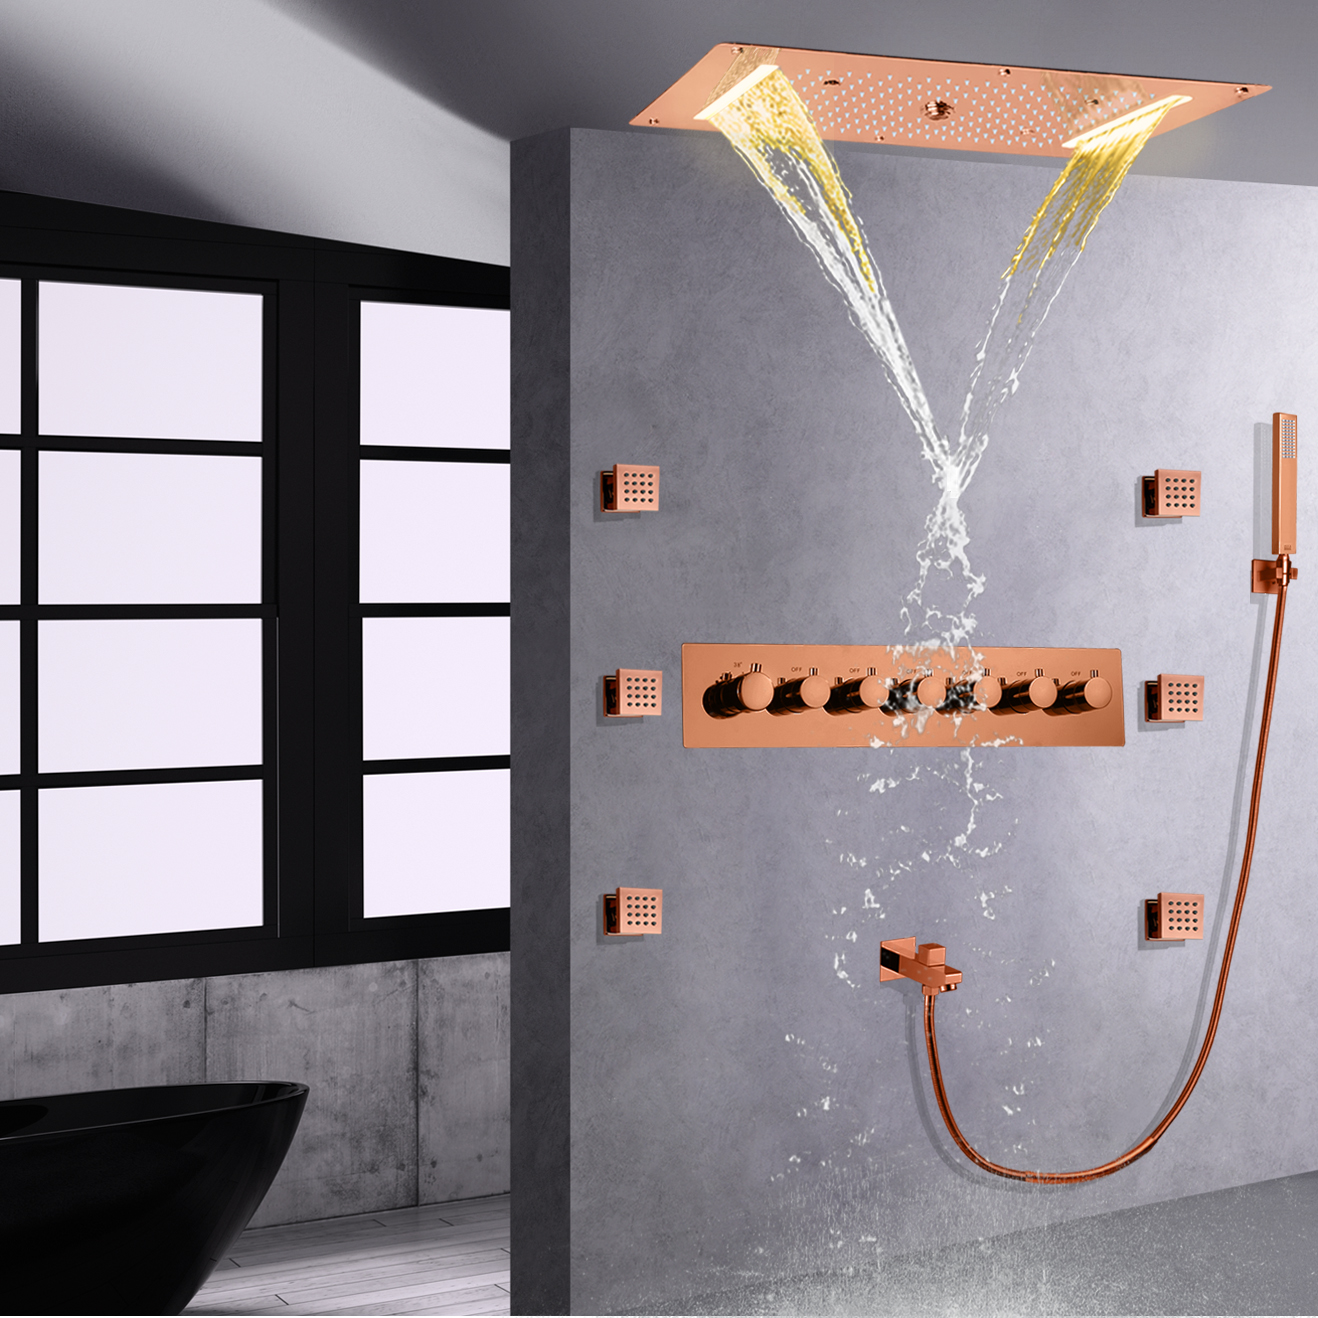 Rose Gold Luxury Bath Shower Mixer LED Bathroom Thermostatic High Flow Shower Waterfall Rainfall